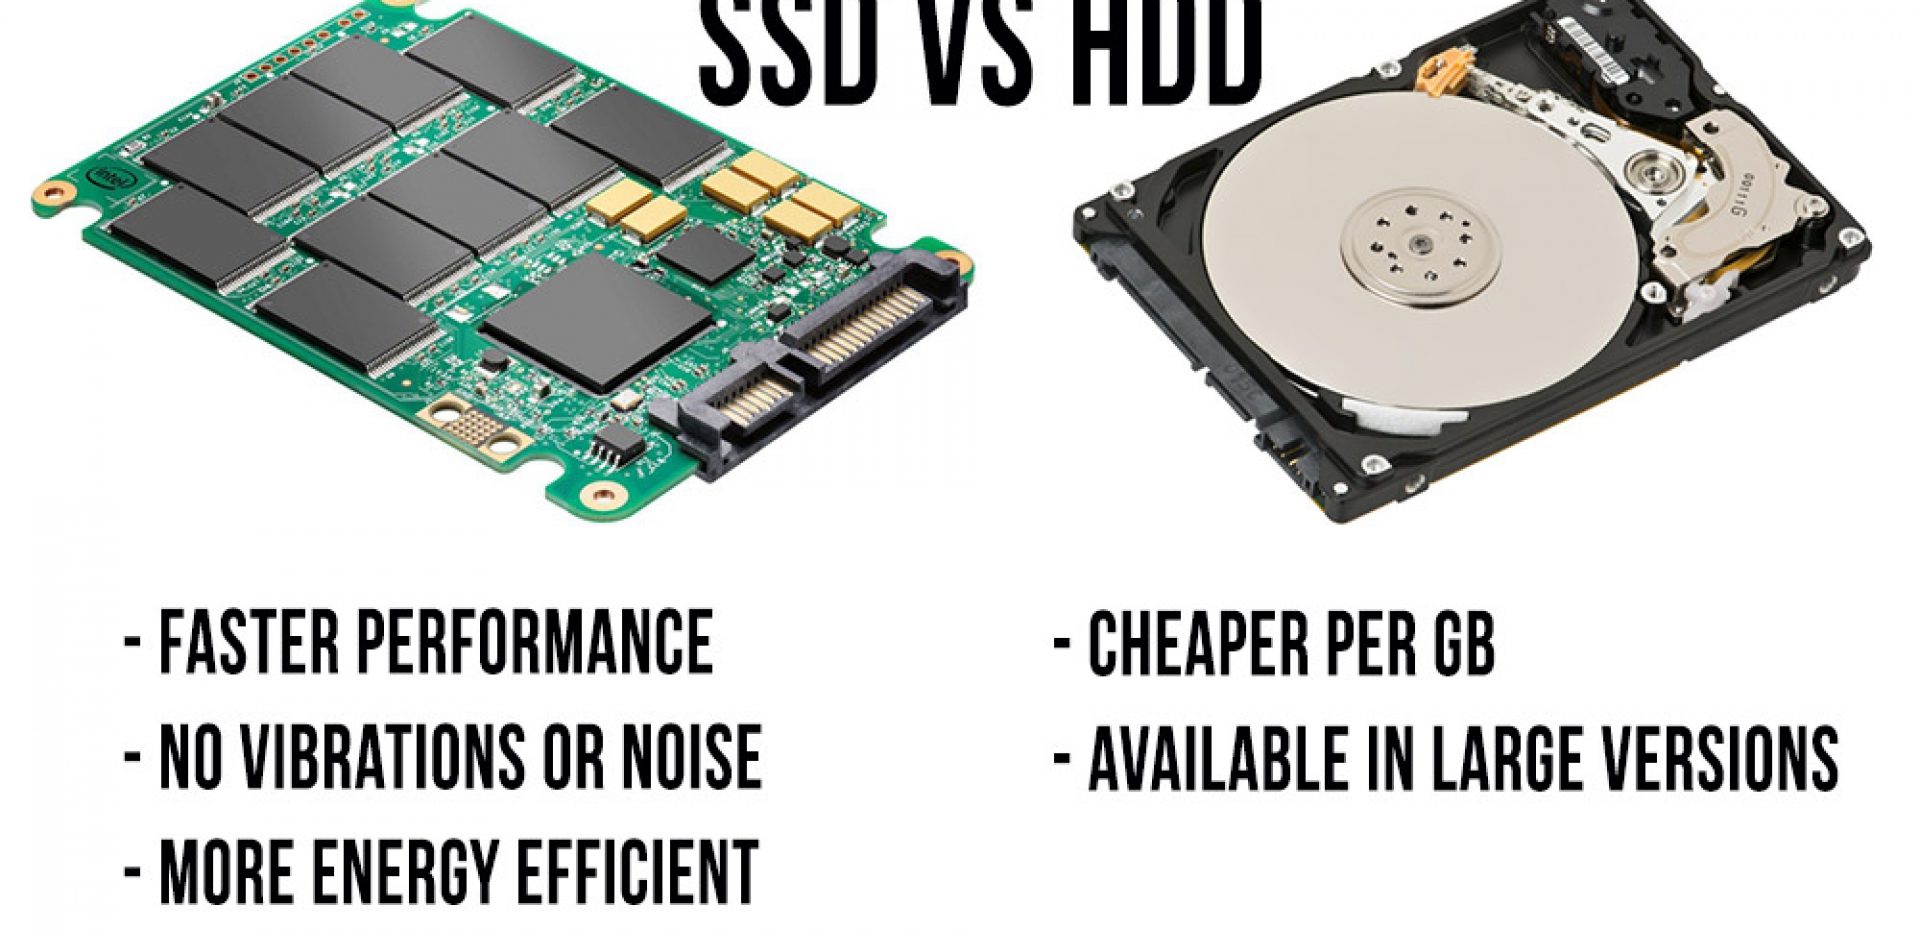 Ssd or hdd for steam фото 28